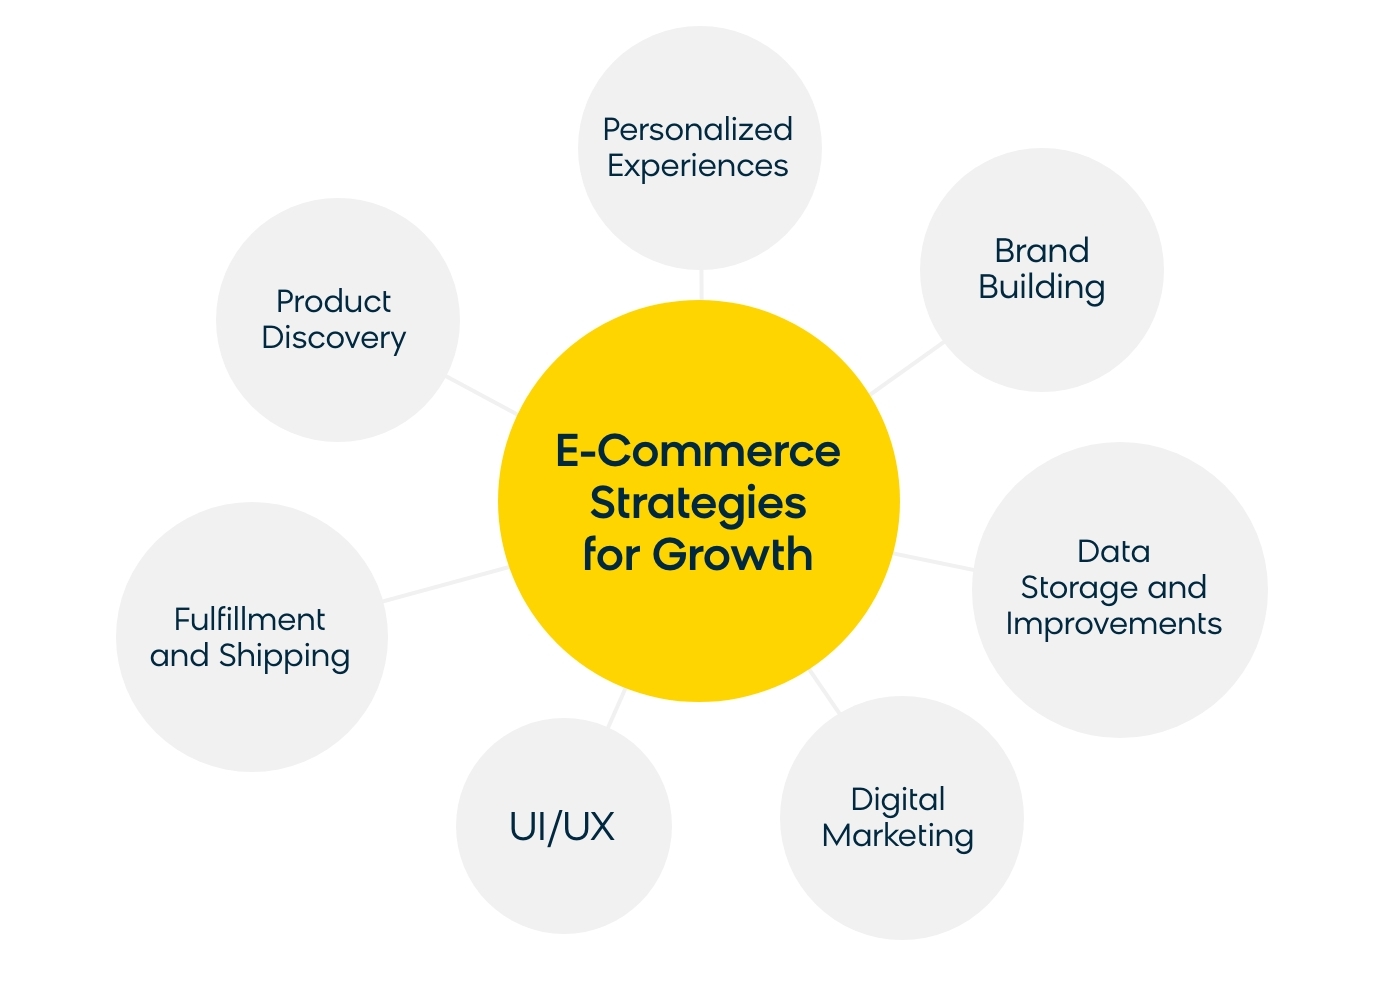 E-Commerce Priorities Including Product Discovery